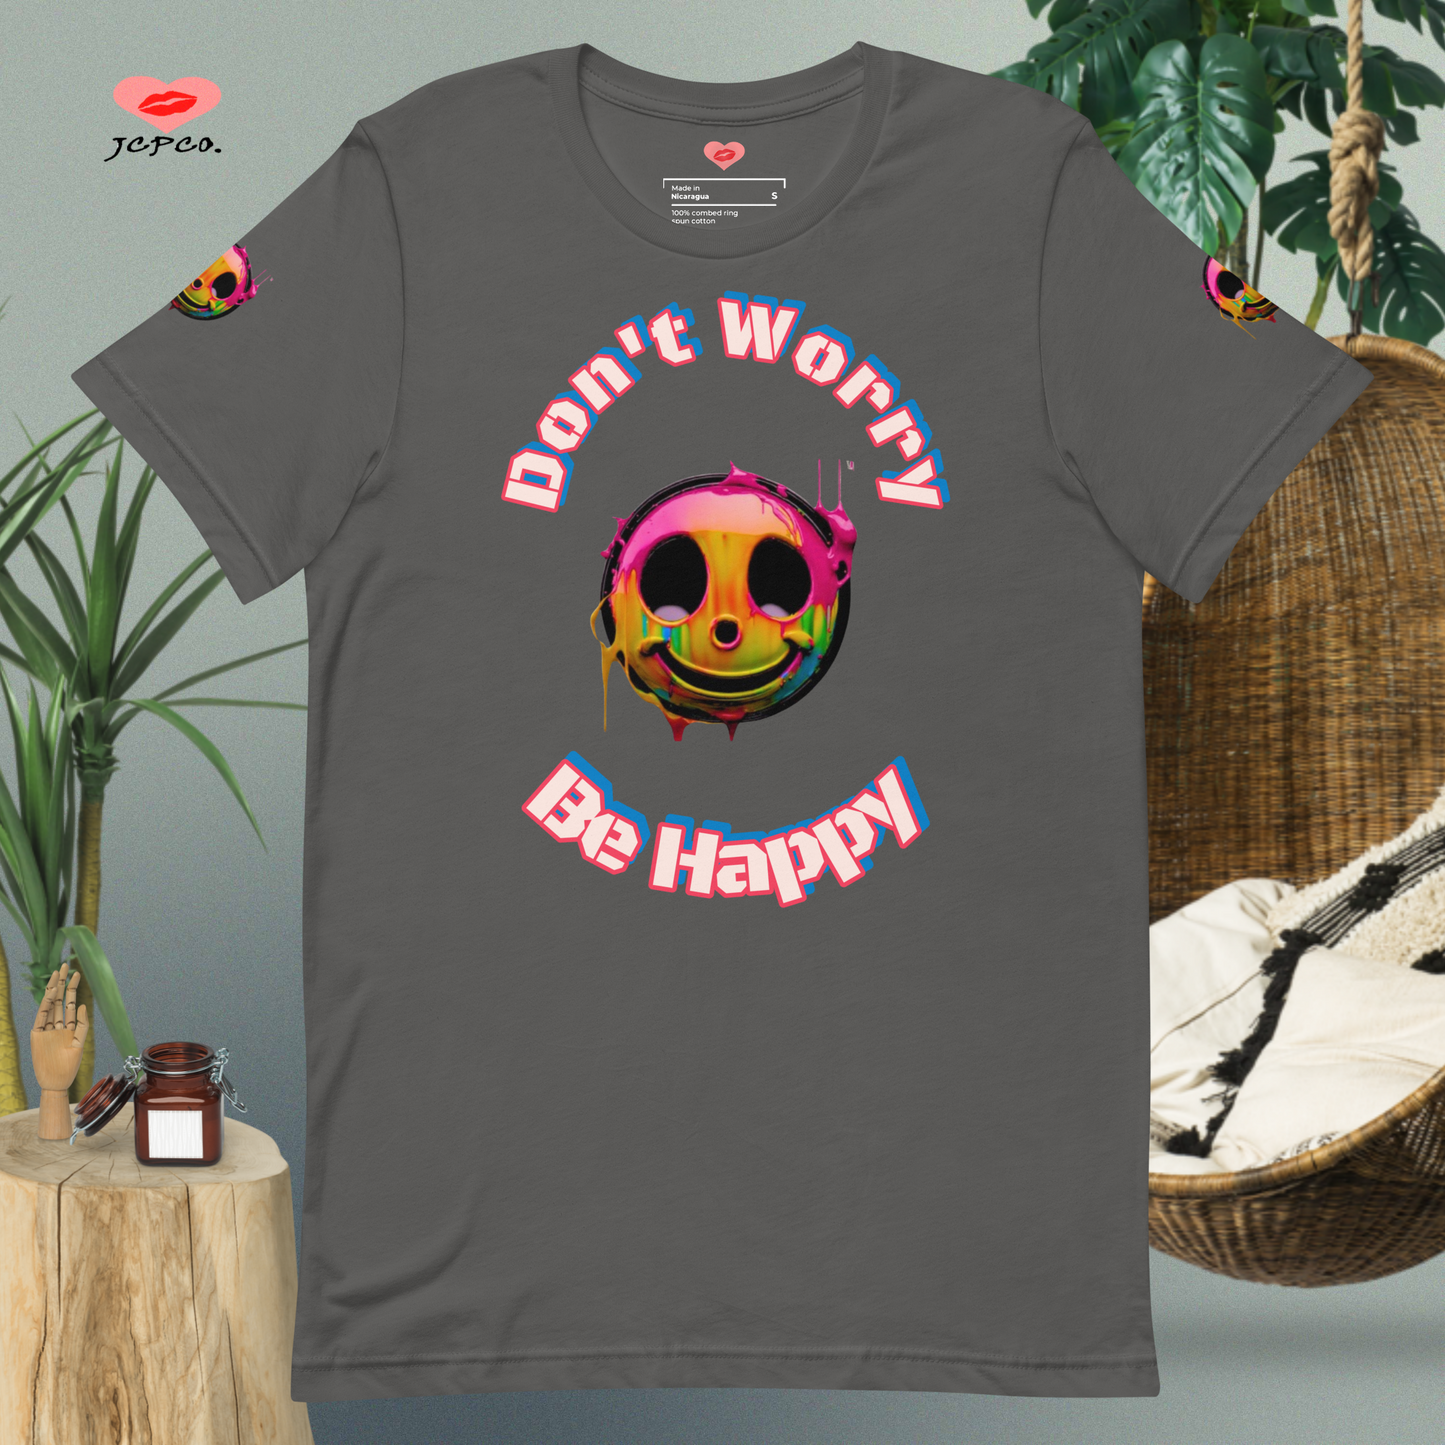 💕Don't' Worry Be Happy Unisex T-Shirt👕